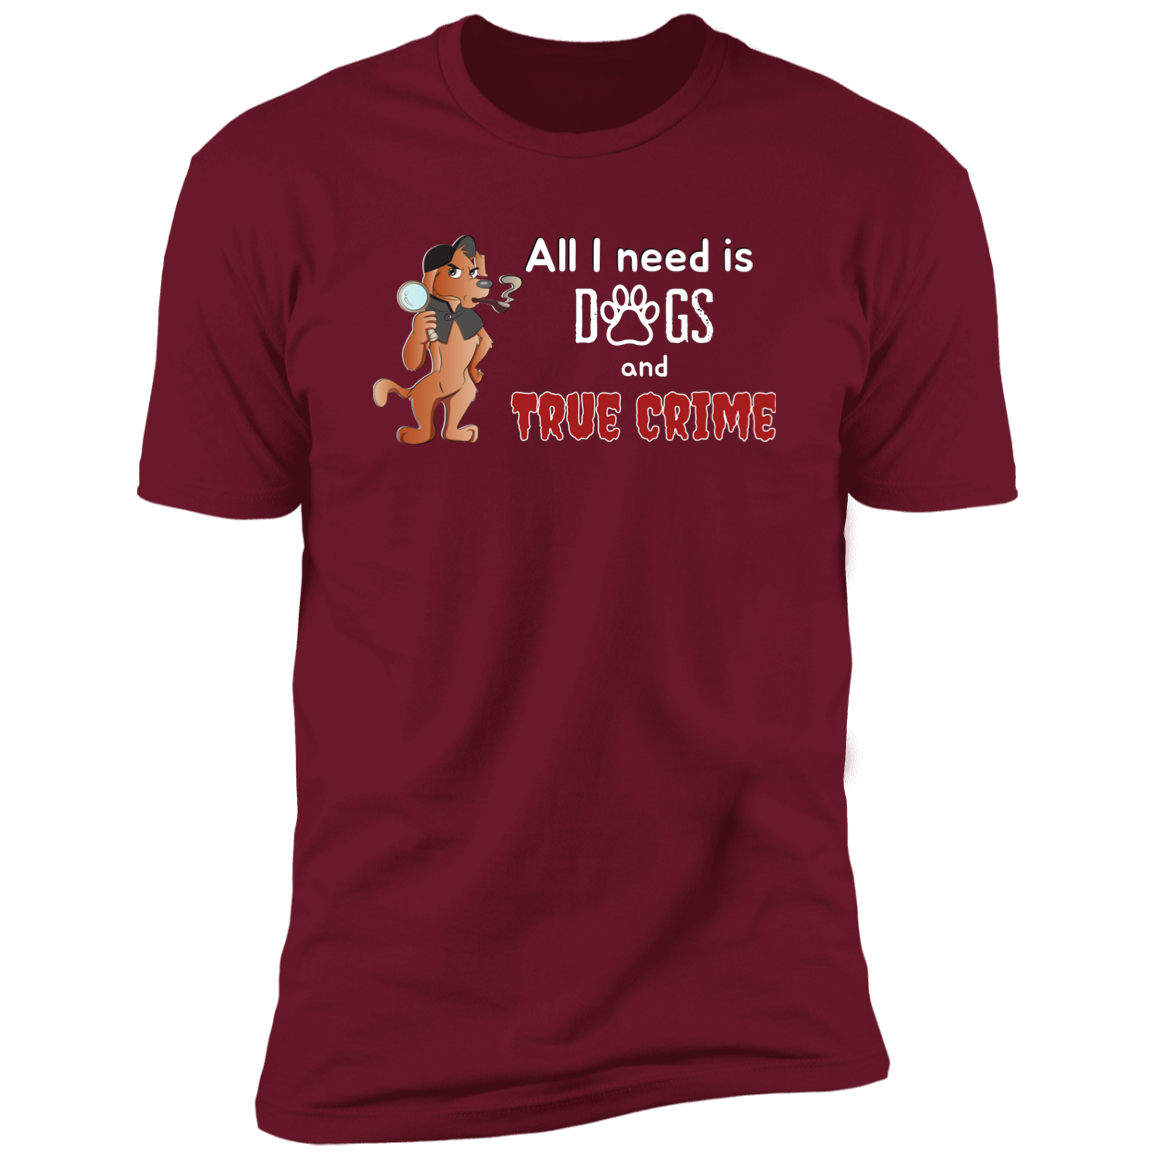 All I Need is Dogs and True Crime, Dog shirt for humas, in  cardinal red